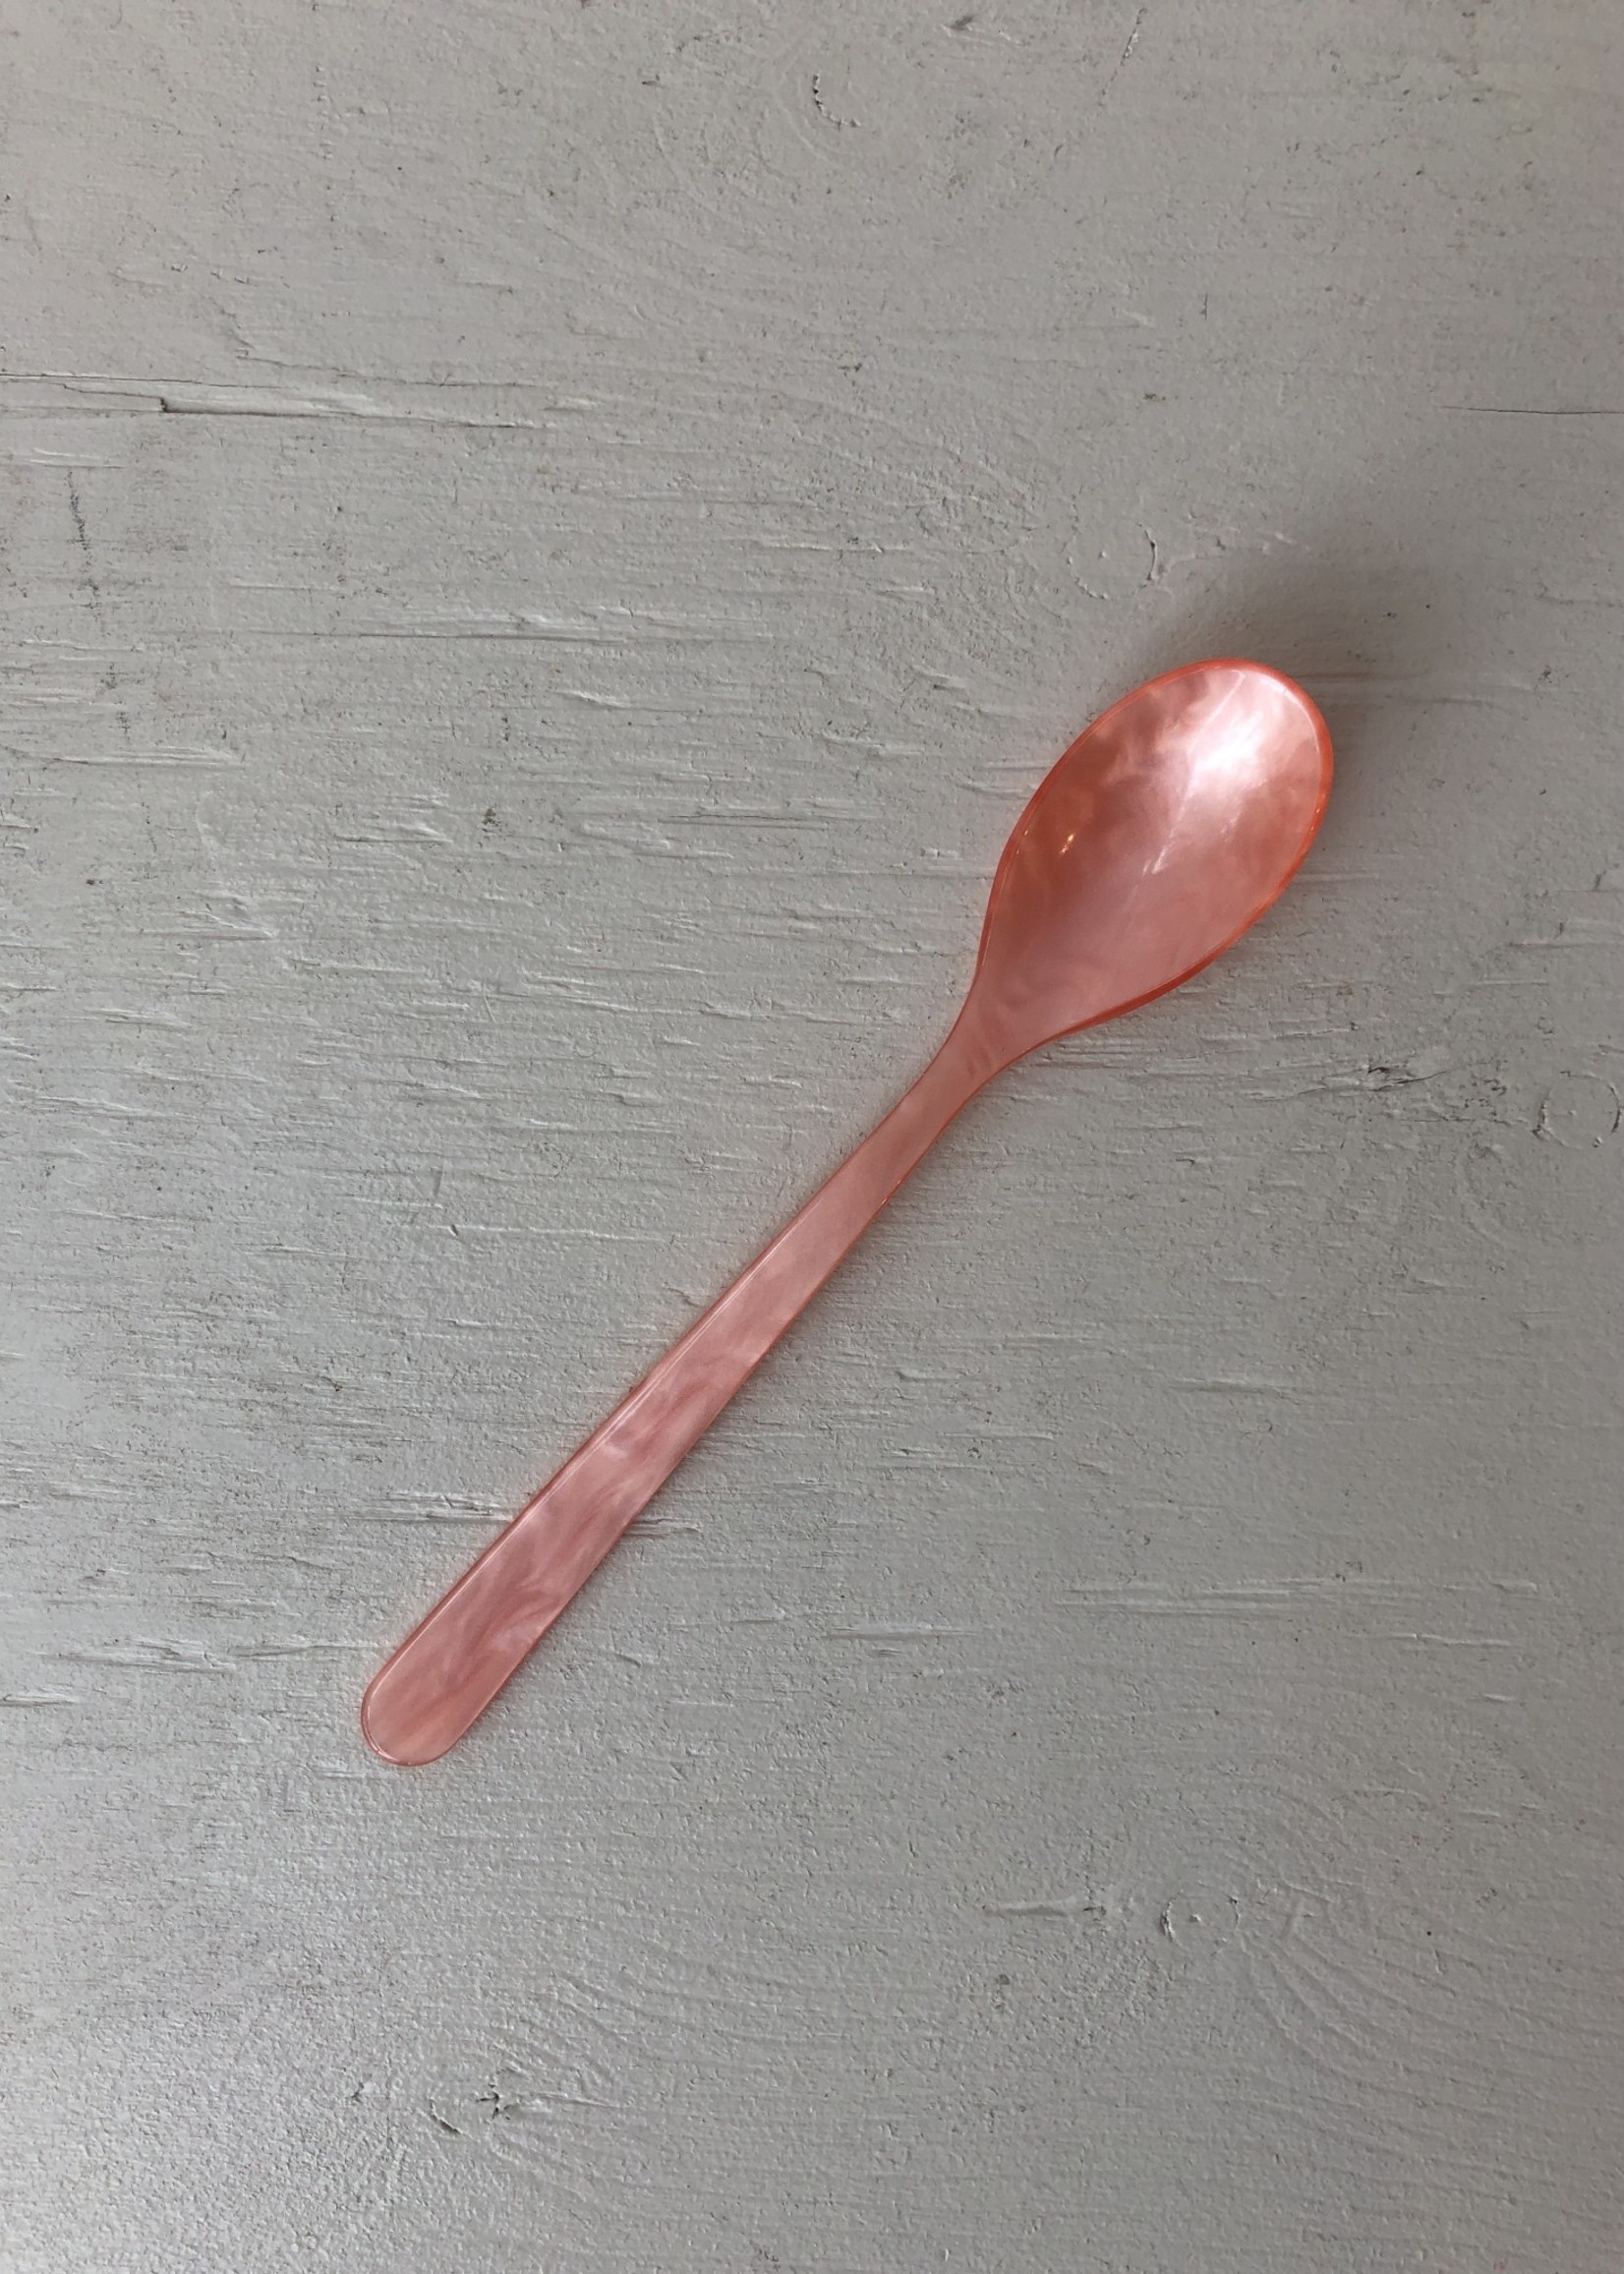 Heim Sohne Cereal Spoons by Heim Söhne